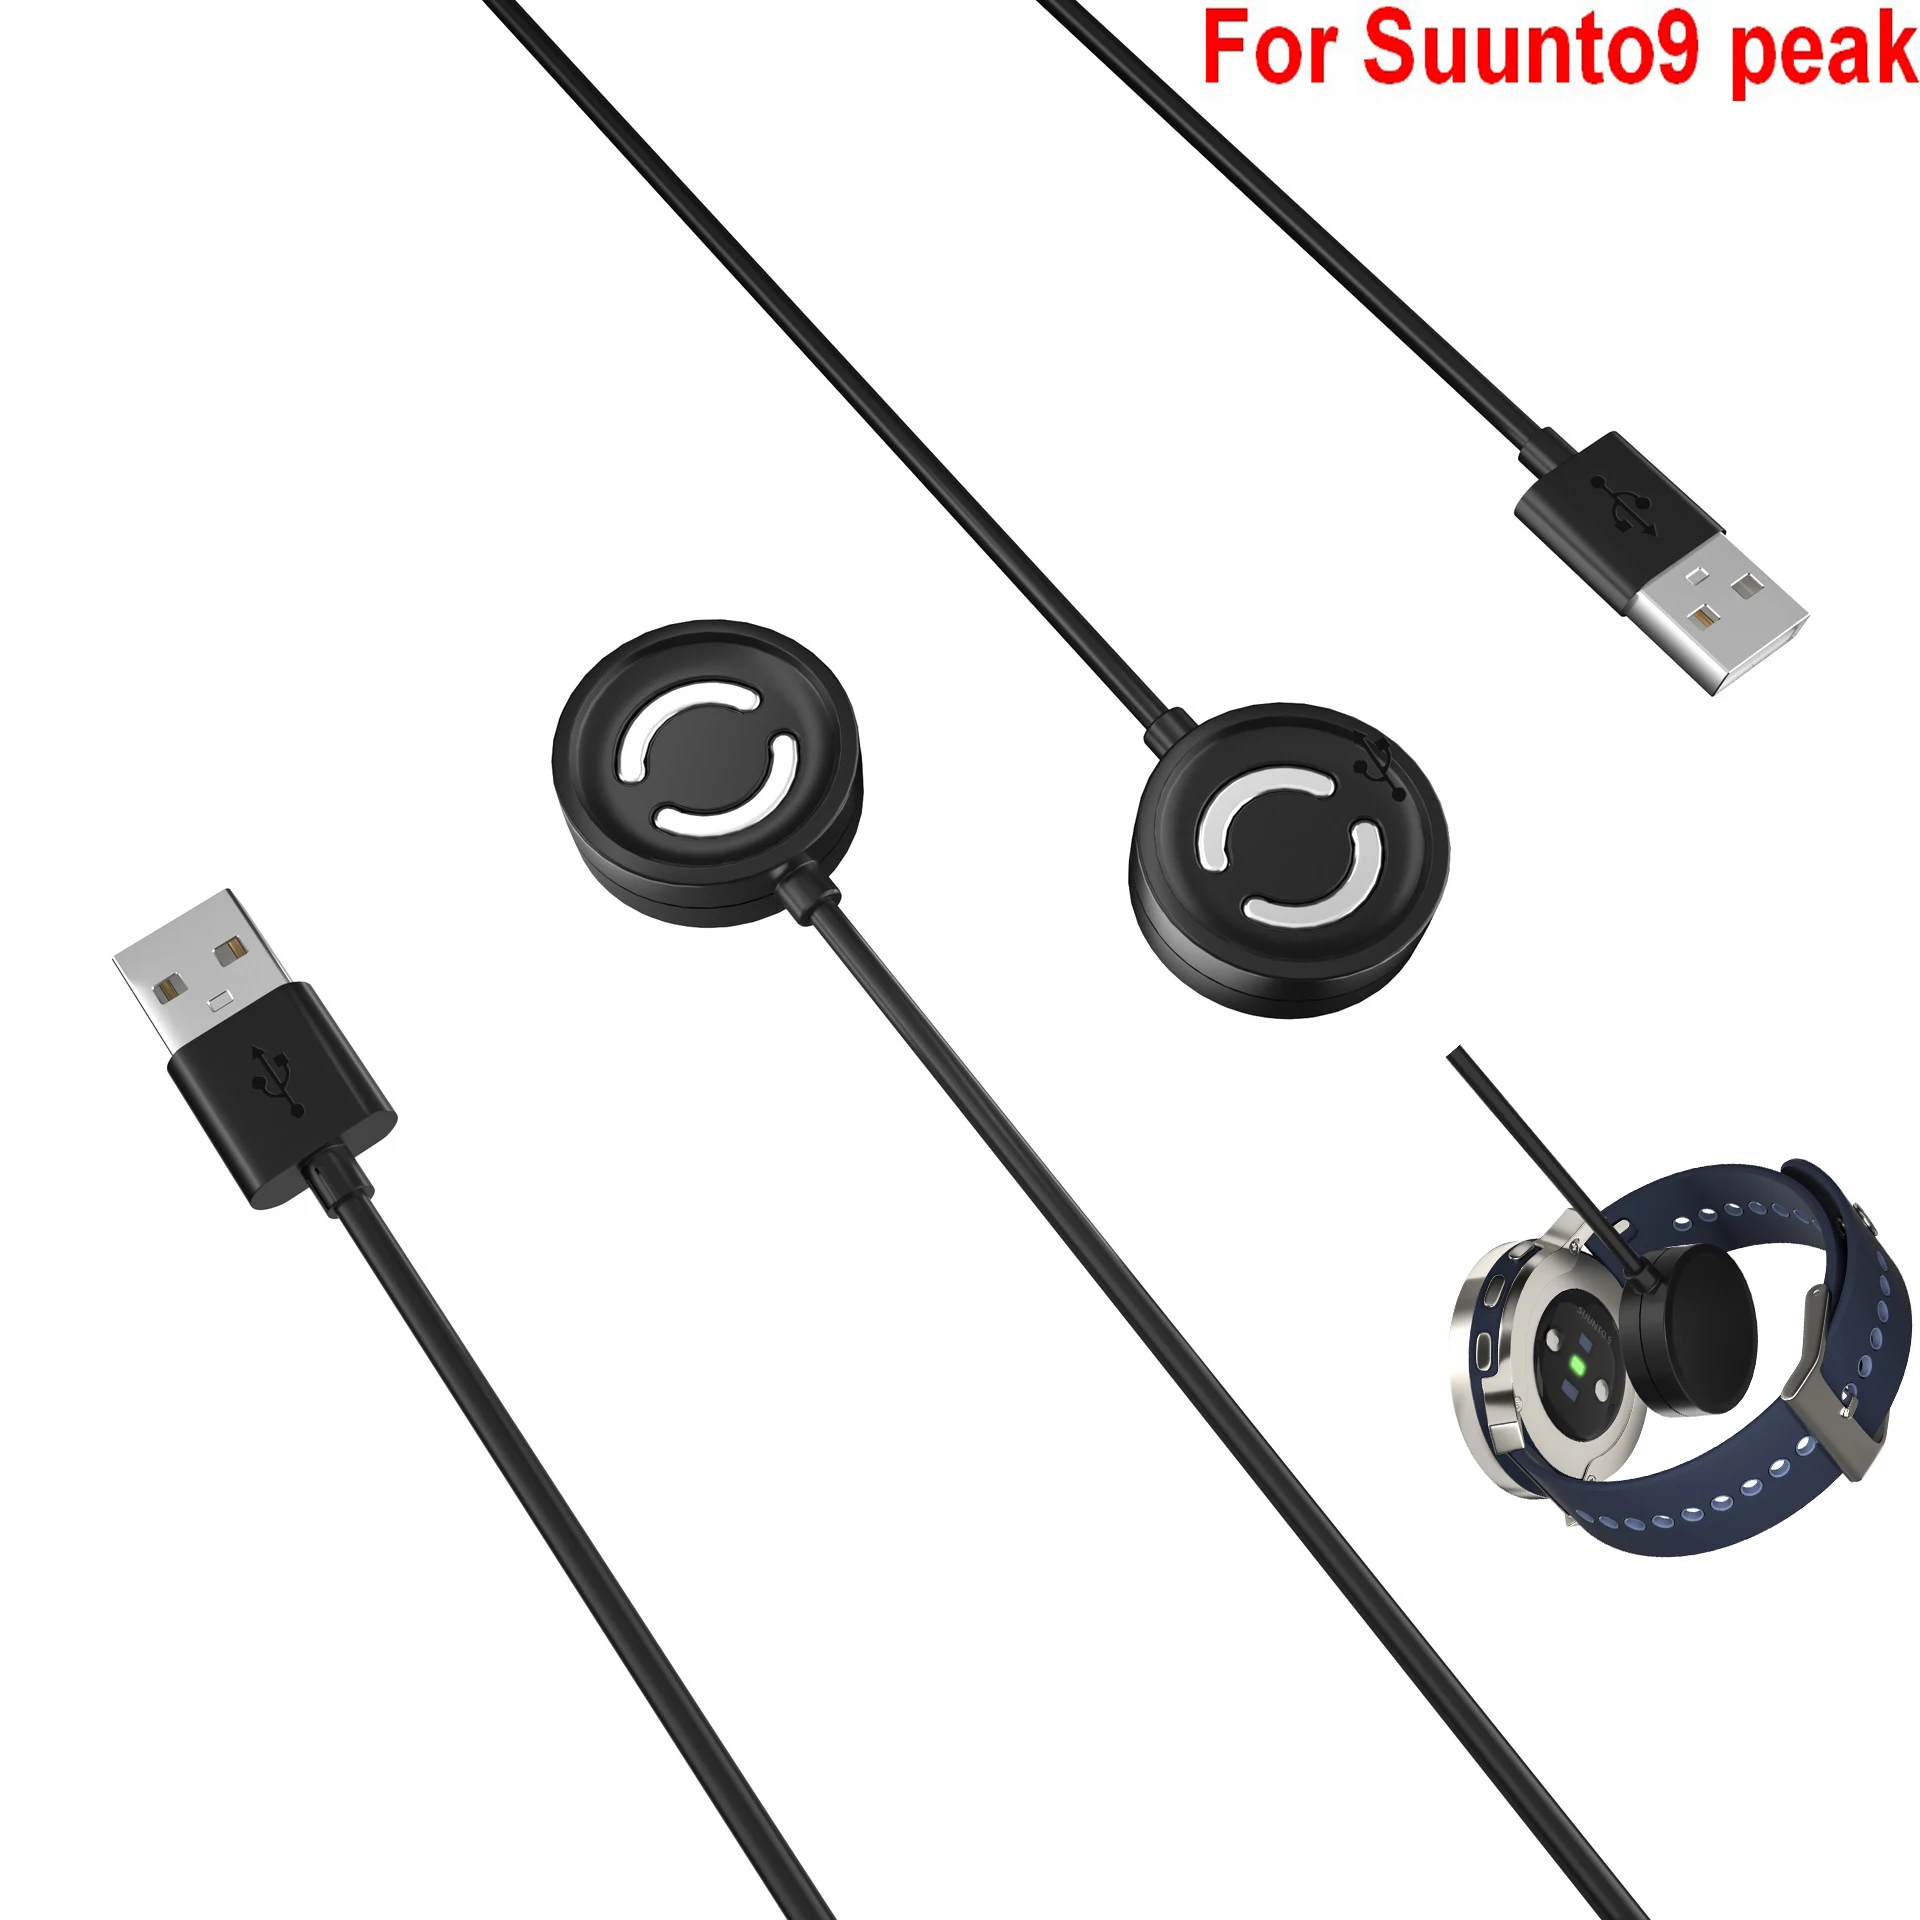 High quality Fast charge For Suunto9 Peak watch Magnetic Charger adapter Suunto 9 Peak Smart Charging Replacement USB Data Cable